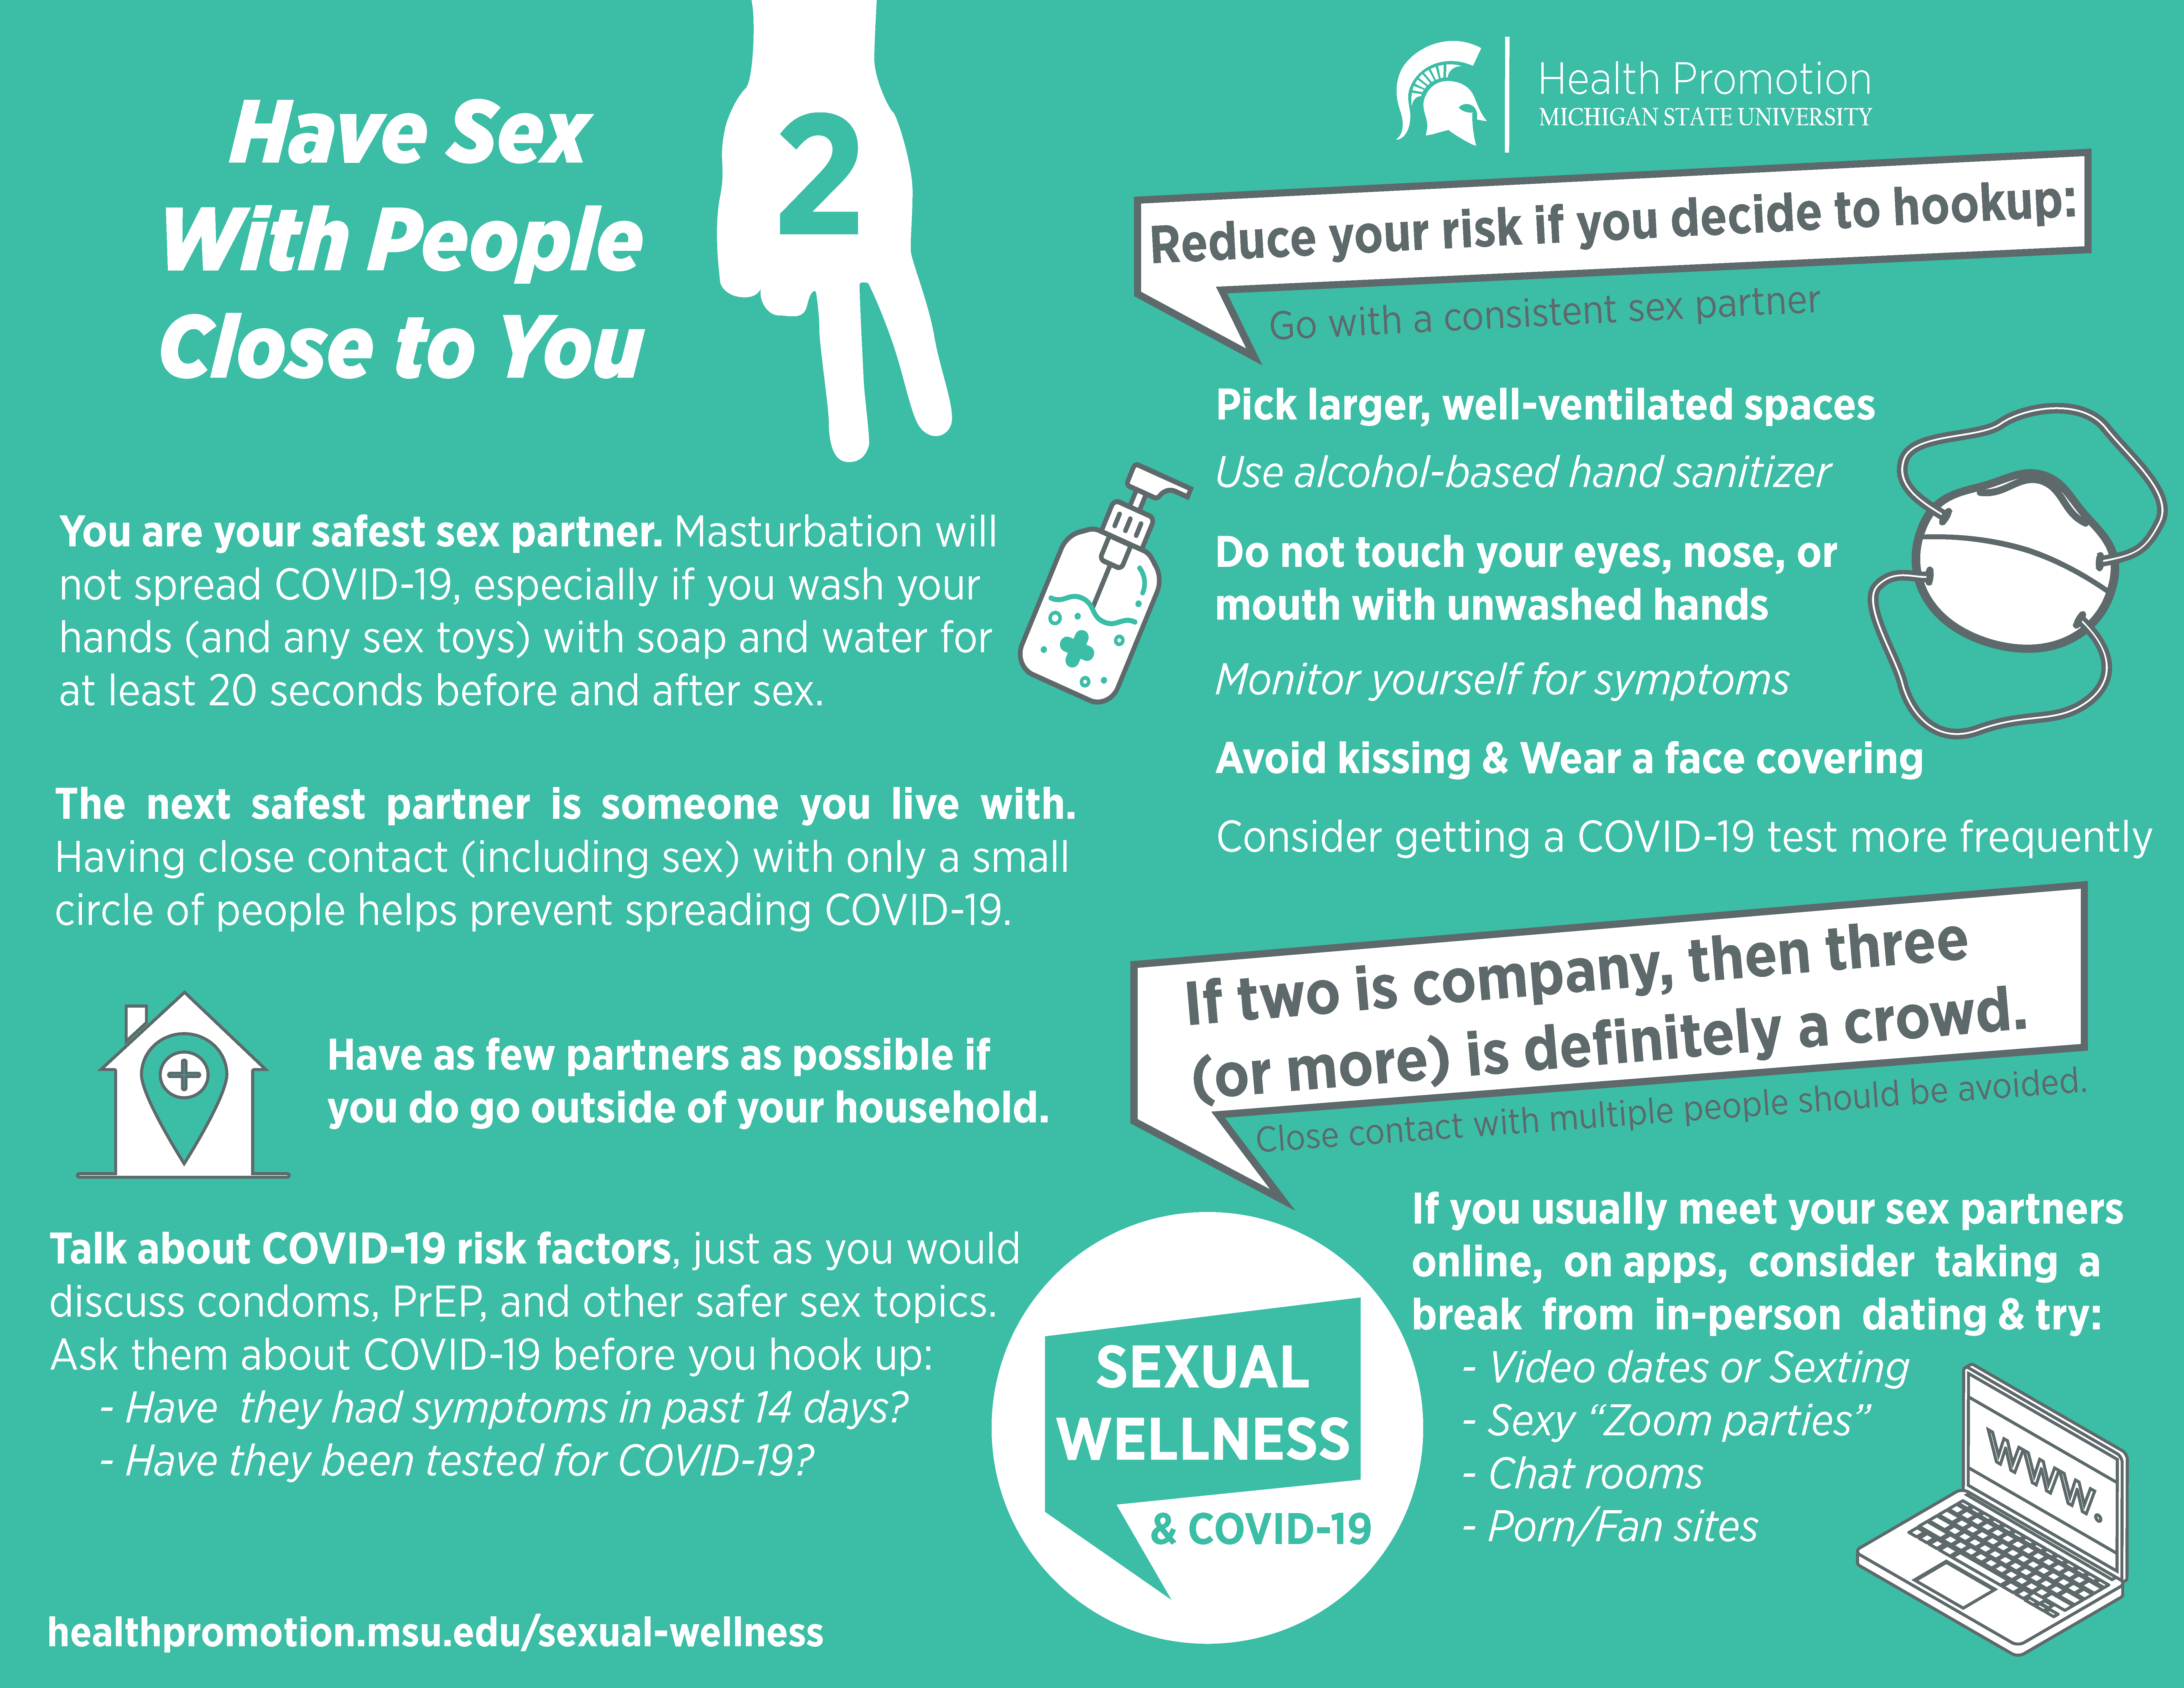 Have sex with people you know